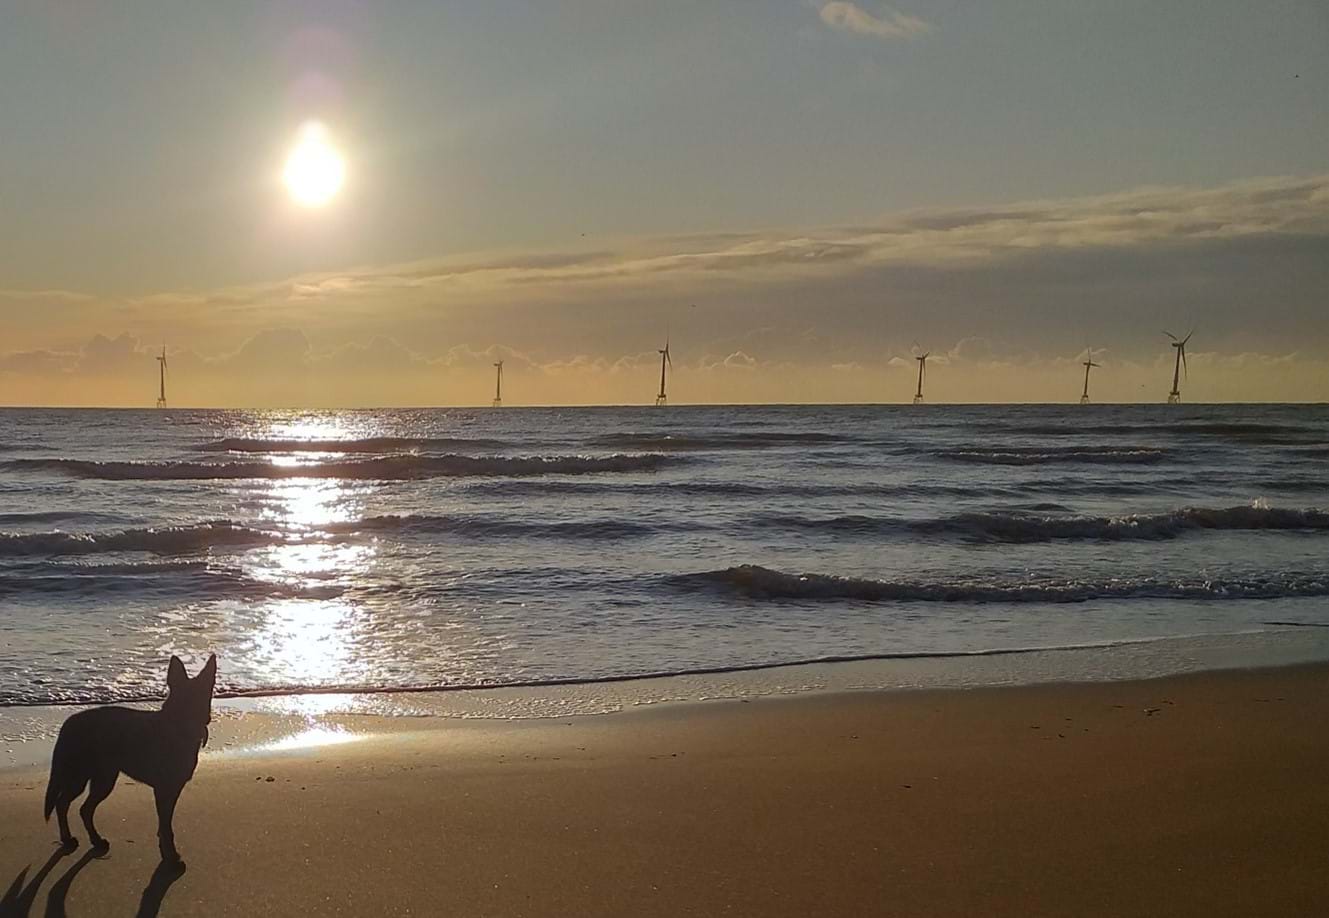 Photo of sunset on beach with wind turbines in the distance